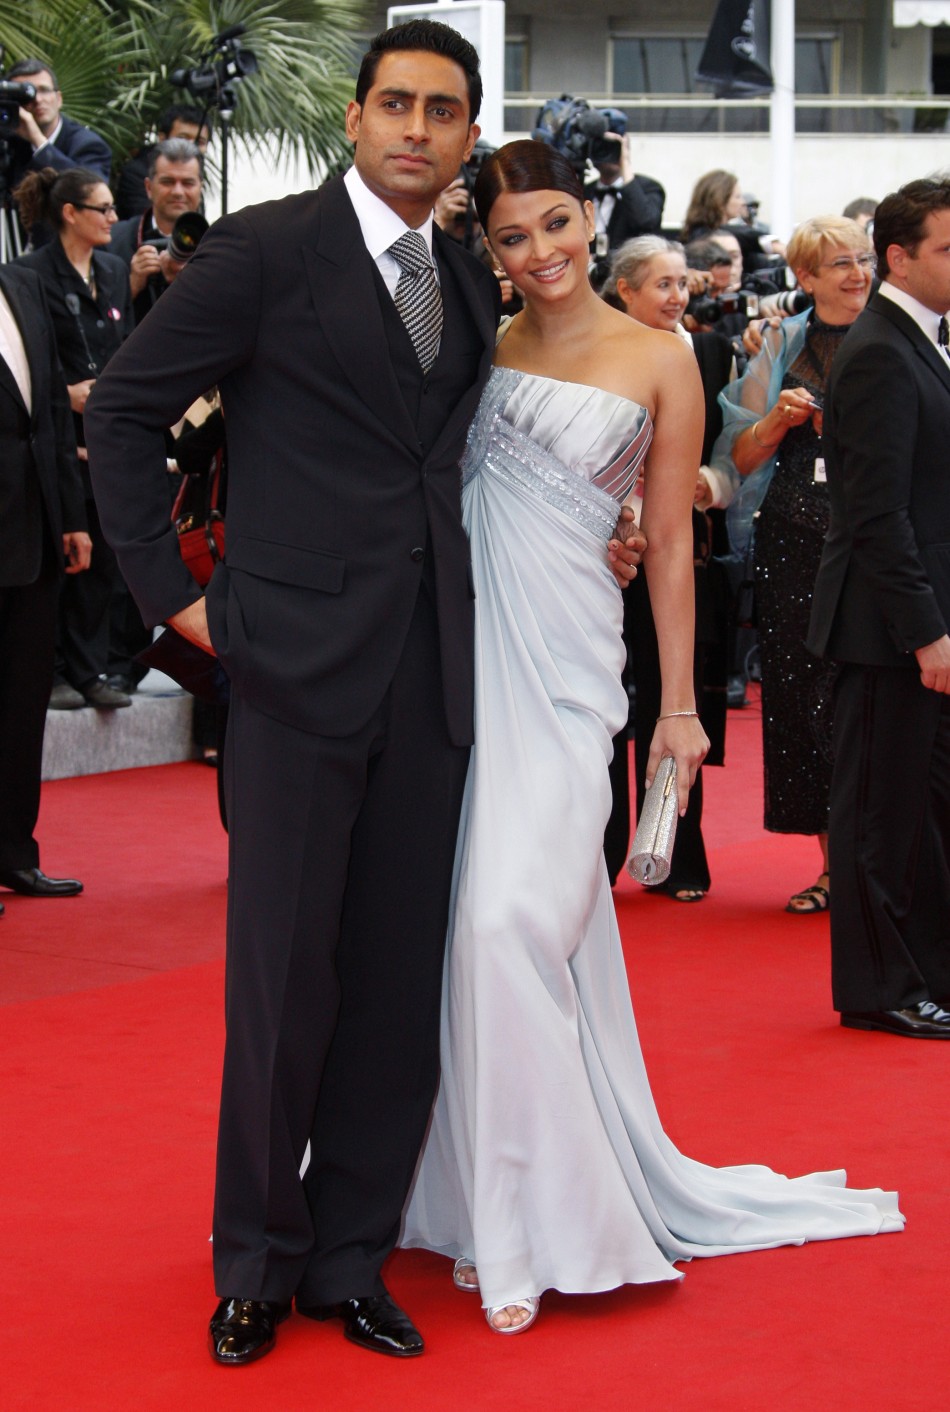 Bollywood actress Aishwarya Rai Bachchan and actor Abhishek Bachchan pose on red carpet as they arrive at 62nd Cannes Film Festival 2009